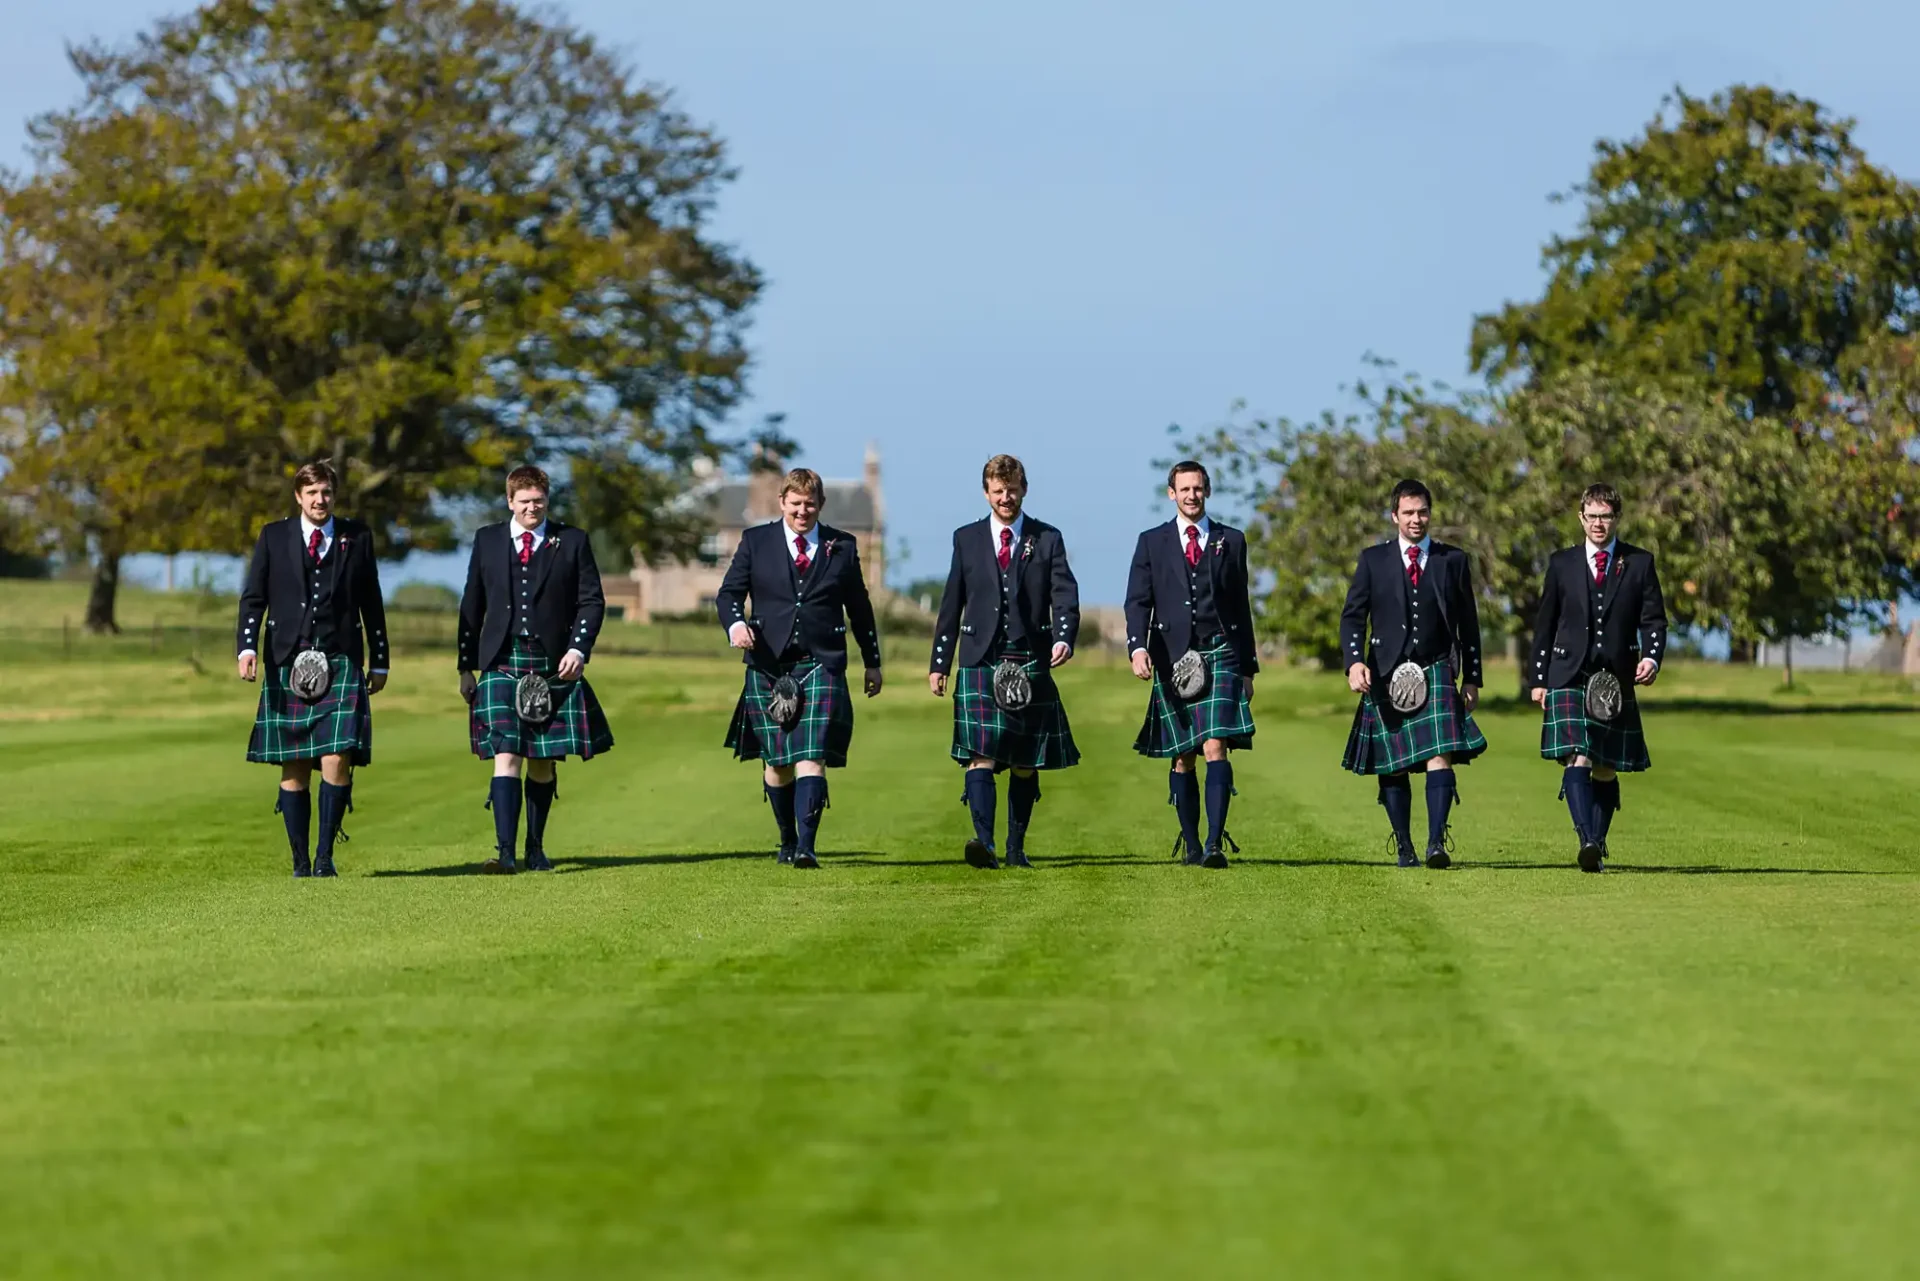 Seven men in traditional scottish kilts and jackets walking in a line on a lush green lawn.